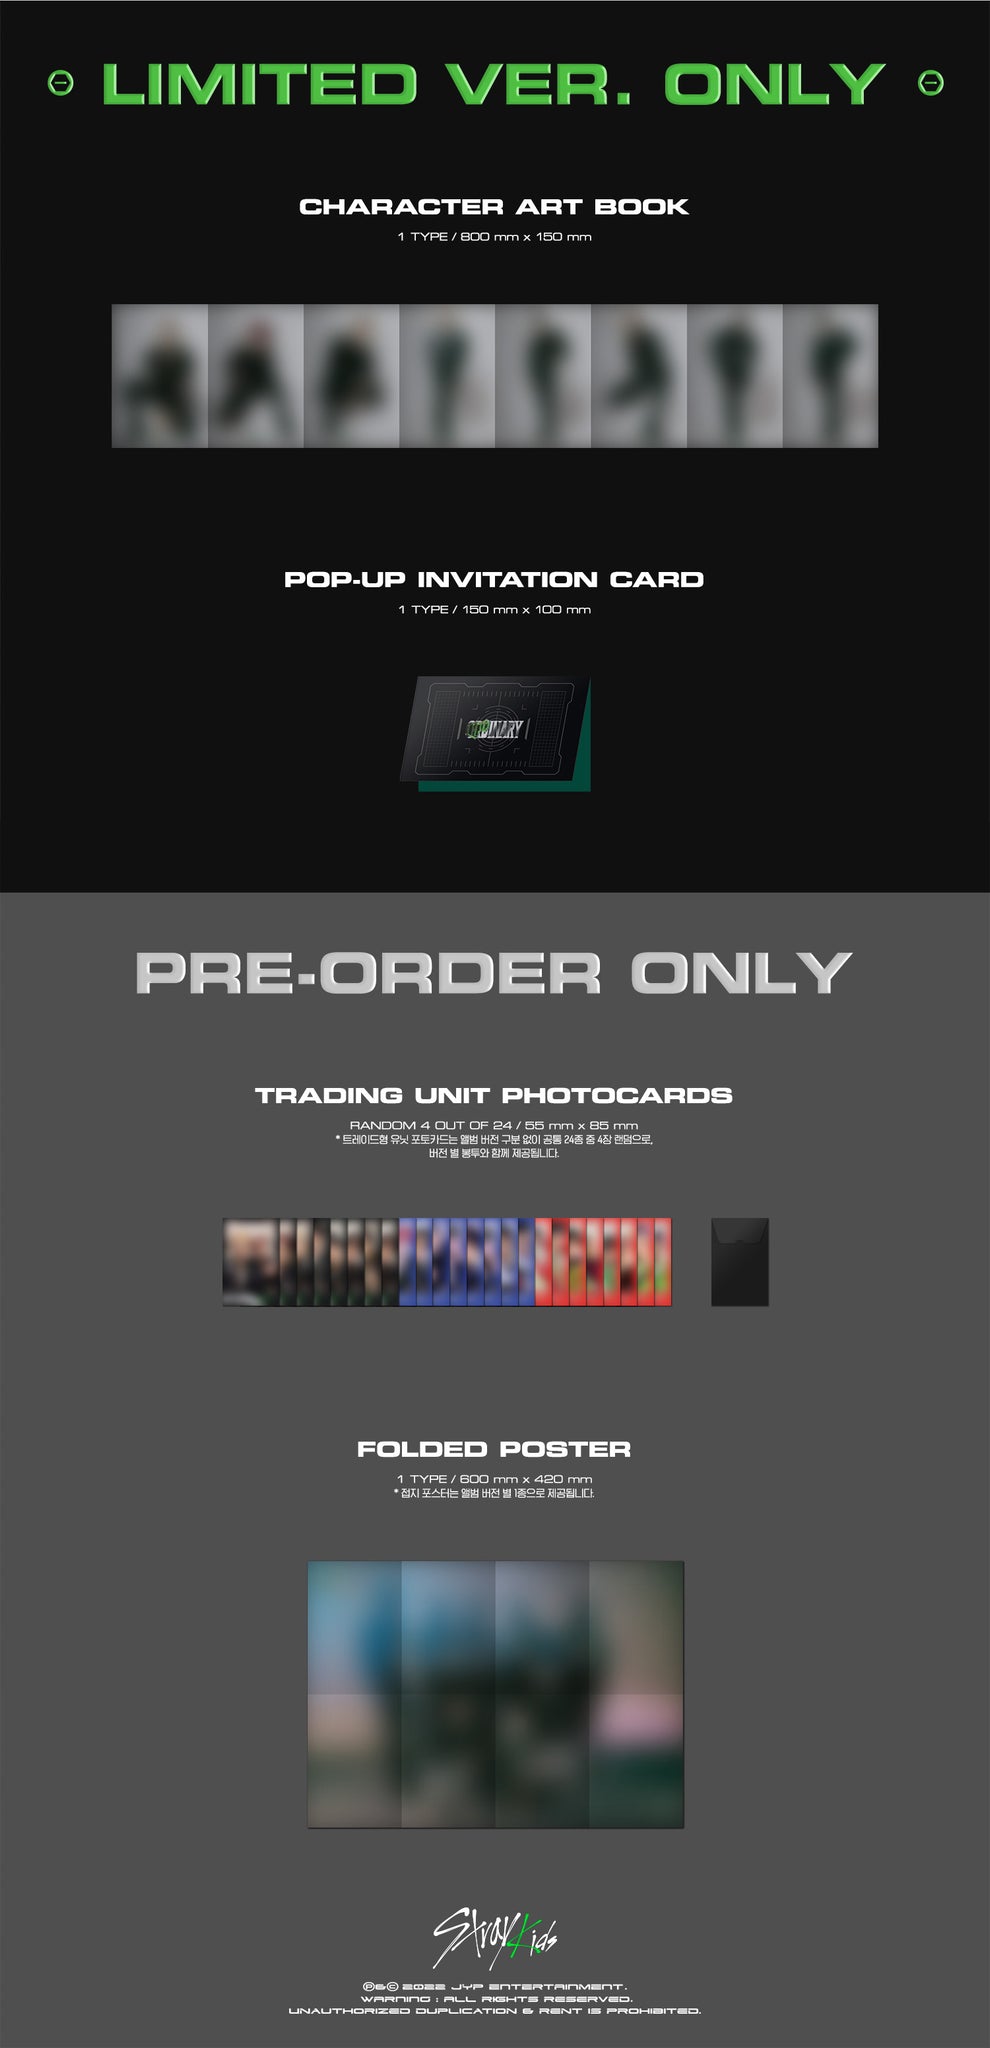 Stray Kids ODDINARY Limited Pre-order Inclusions Character Artbook Pop-up Invitation Card Trading Unit Photocards Folded Poster